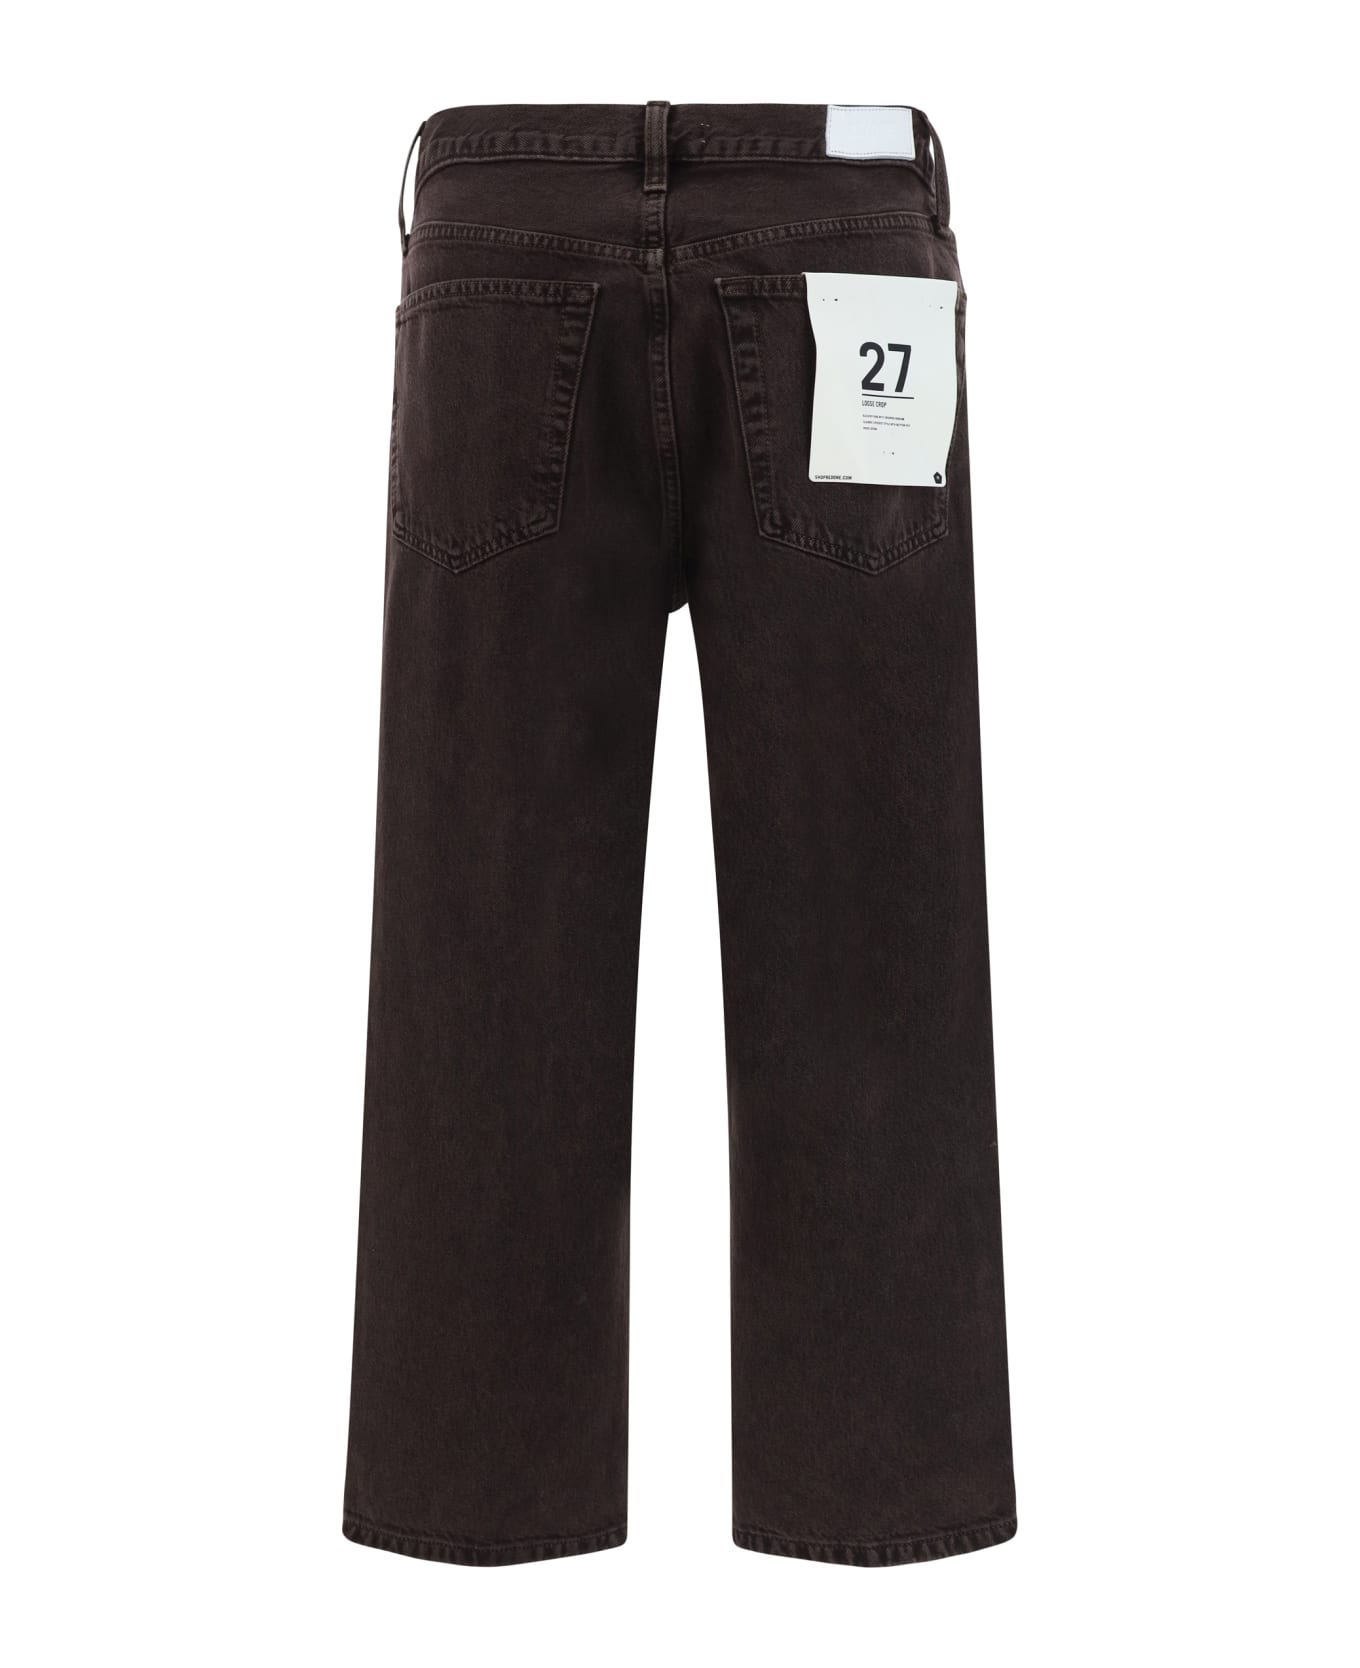 RE/DONE Loose Denim Pants - Cocoa